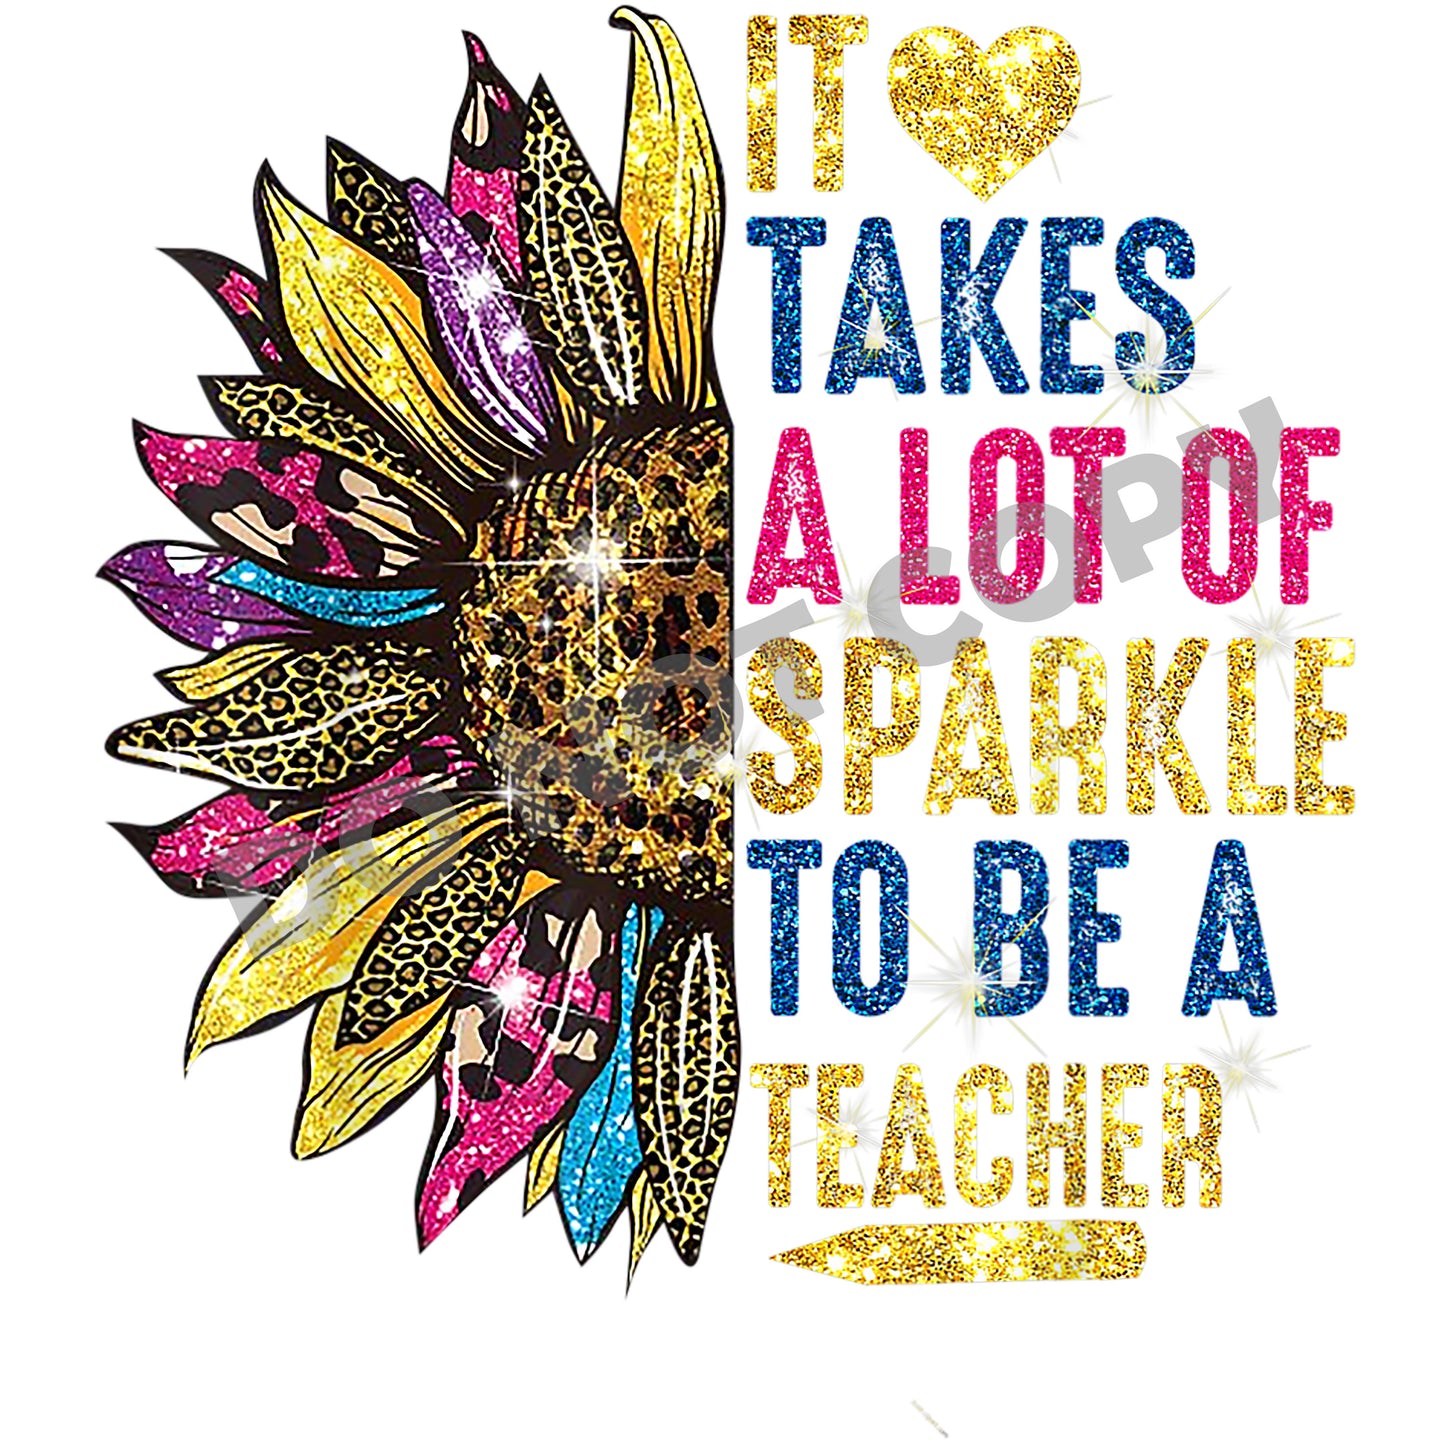 It Takes A Lot Of Sparkle To Be A Teacher -DTF Transfer